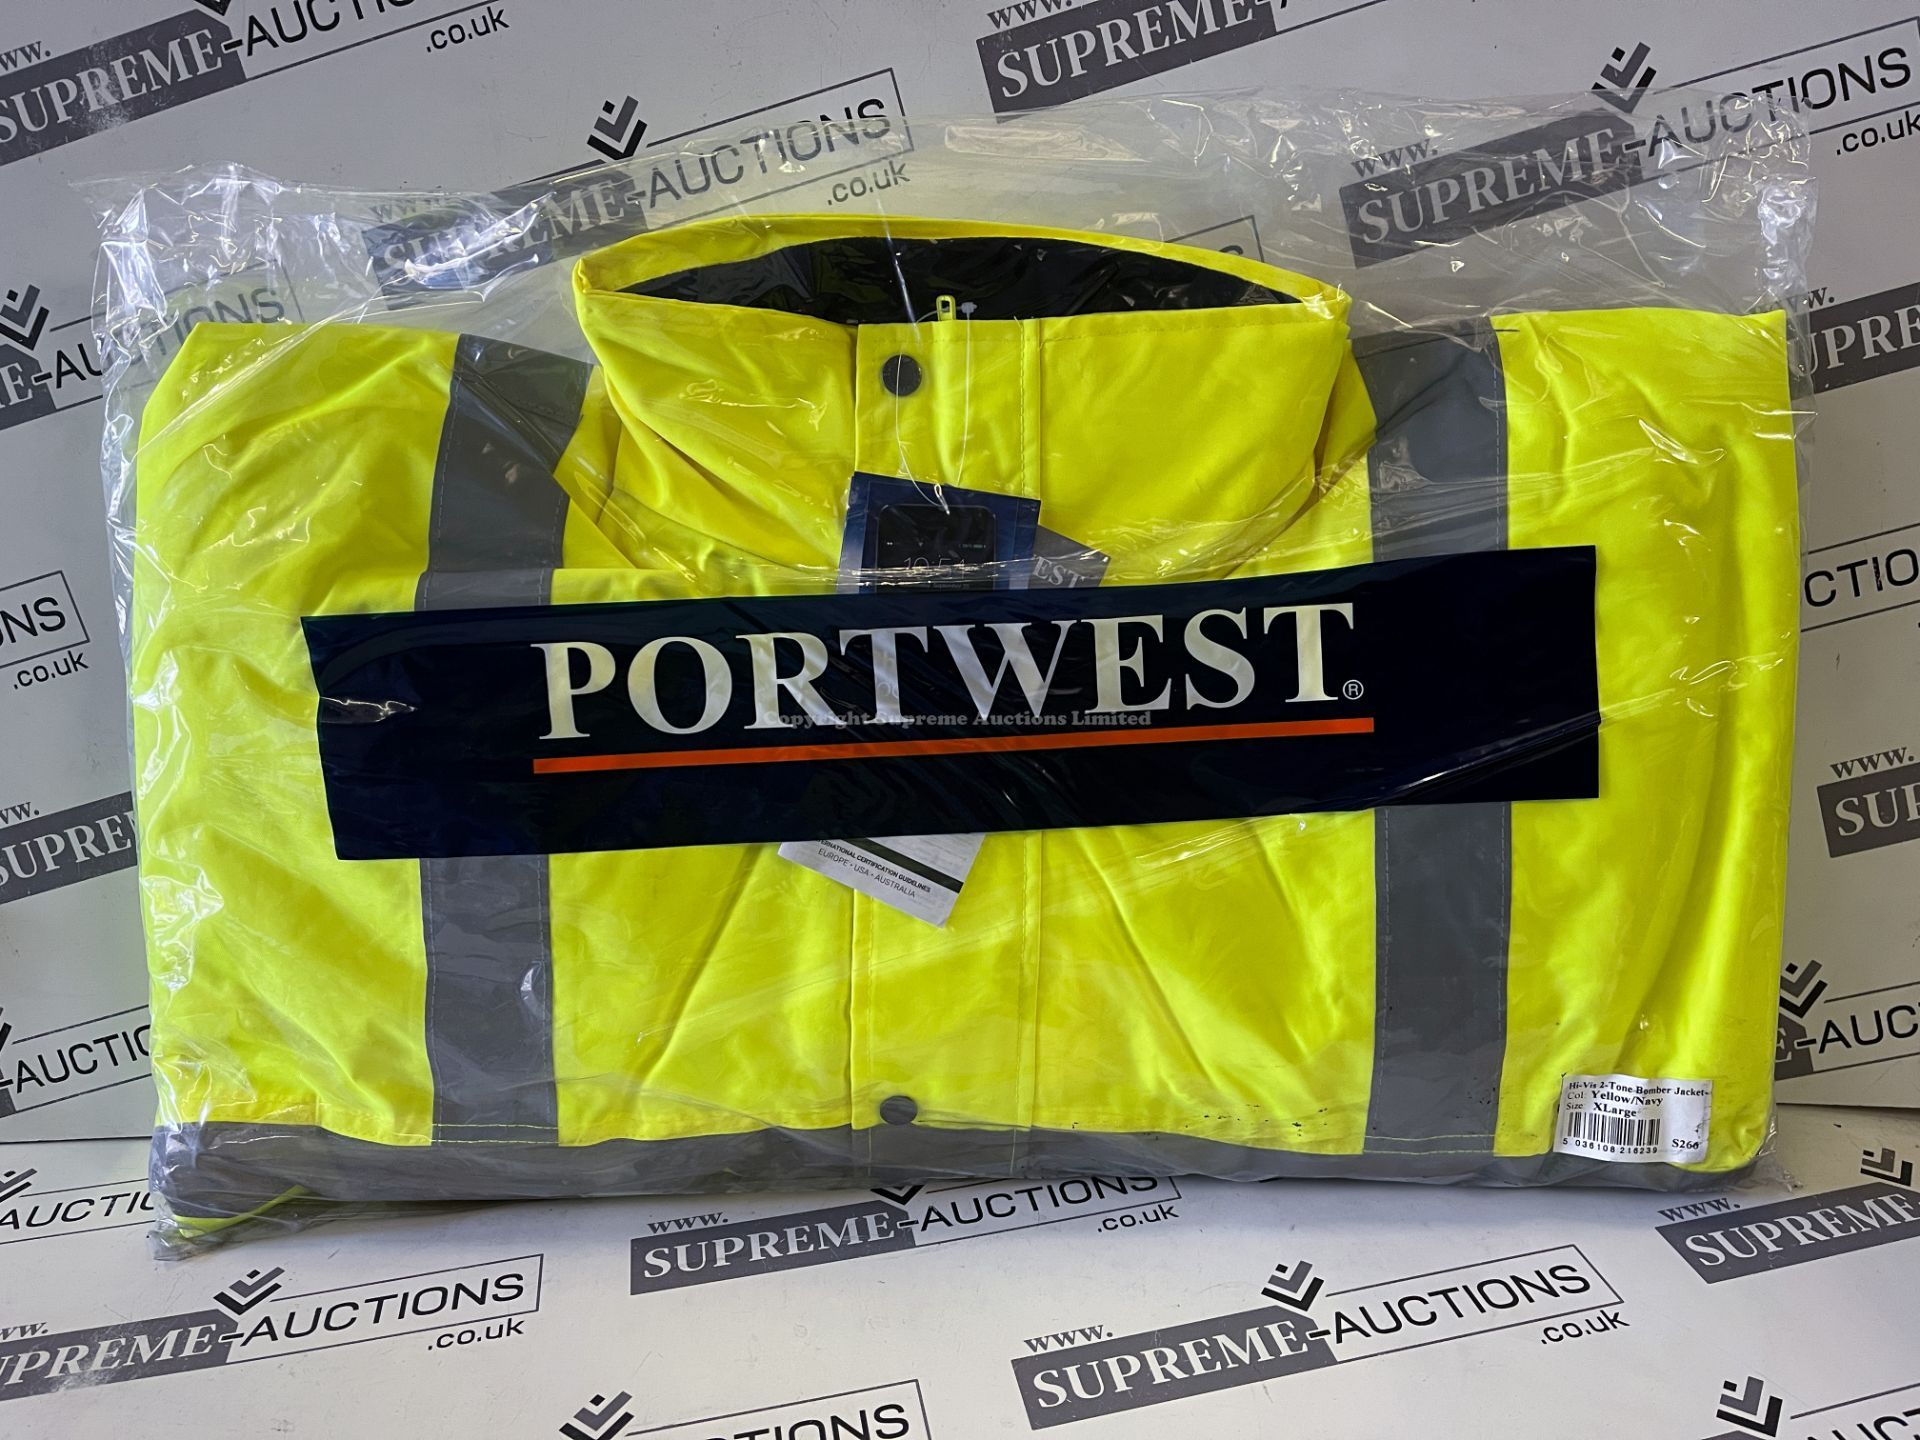 12x BRAND NEW PACKAGED PORTWEST HI-VIS 2 TONE BOMBER JACKETS YELLOW/NAVY - SIZE LARGE. (S2-14)